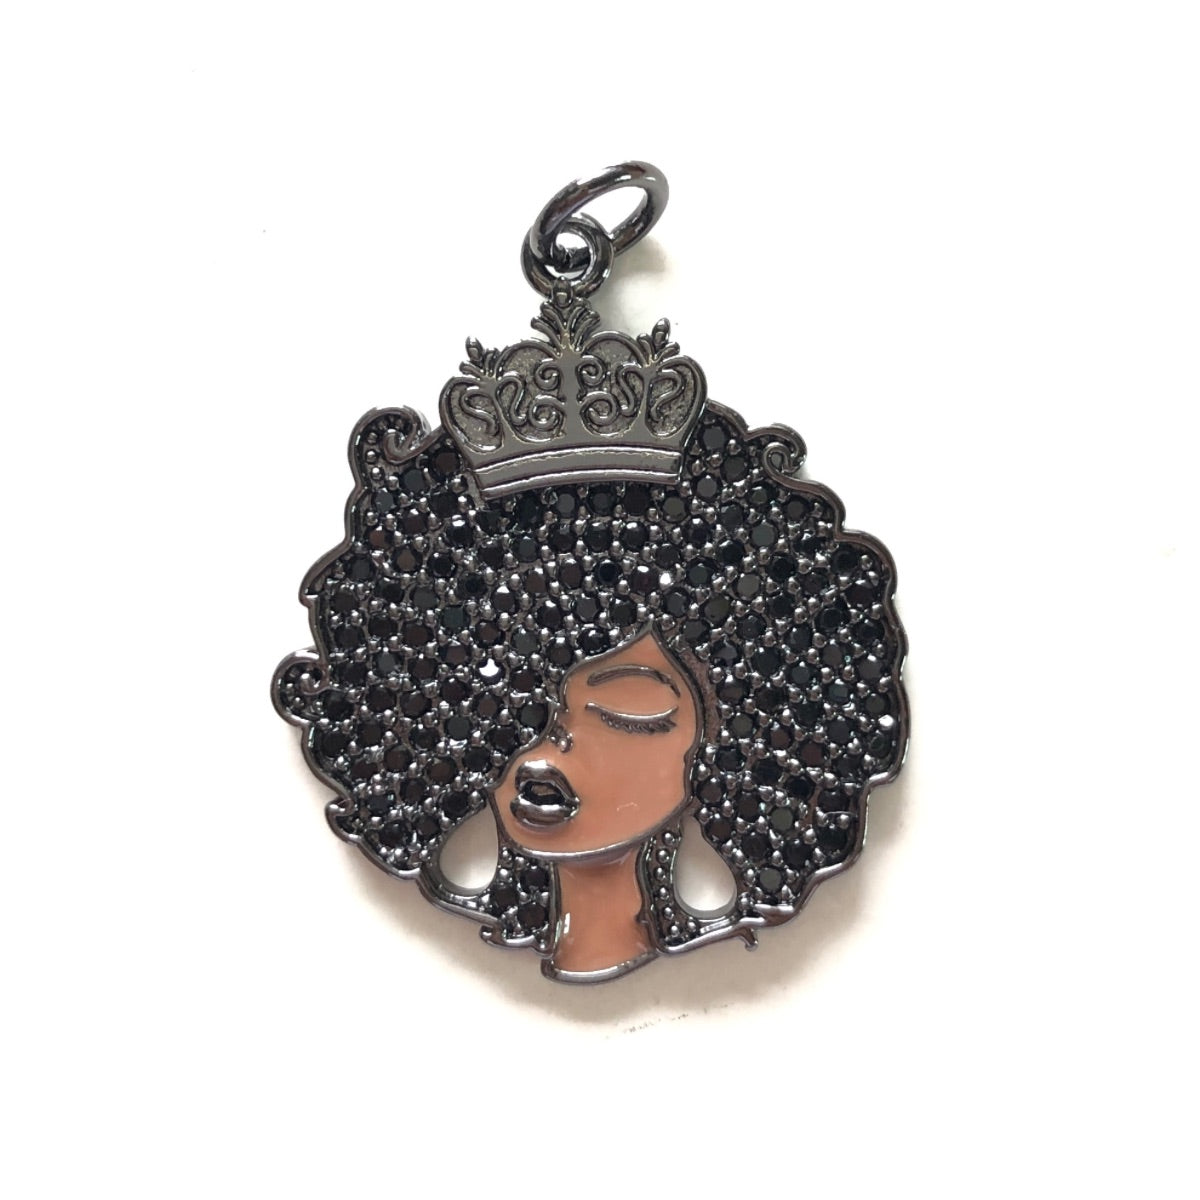 10pcs/lot 31.6*26mm CZ Afro Girl Black Queen Charm Pendants Black on Black CZ Paved Charms Afro Girl/Queen Charms On Sale Charms Beads Beyond